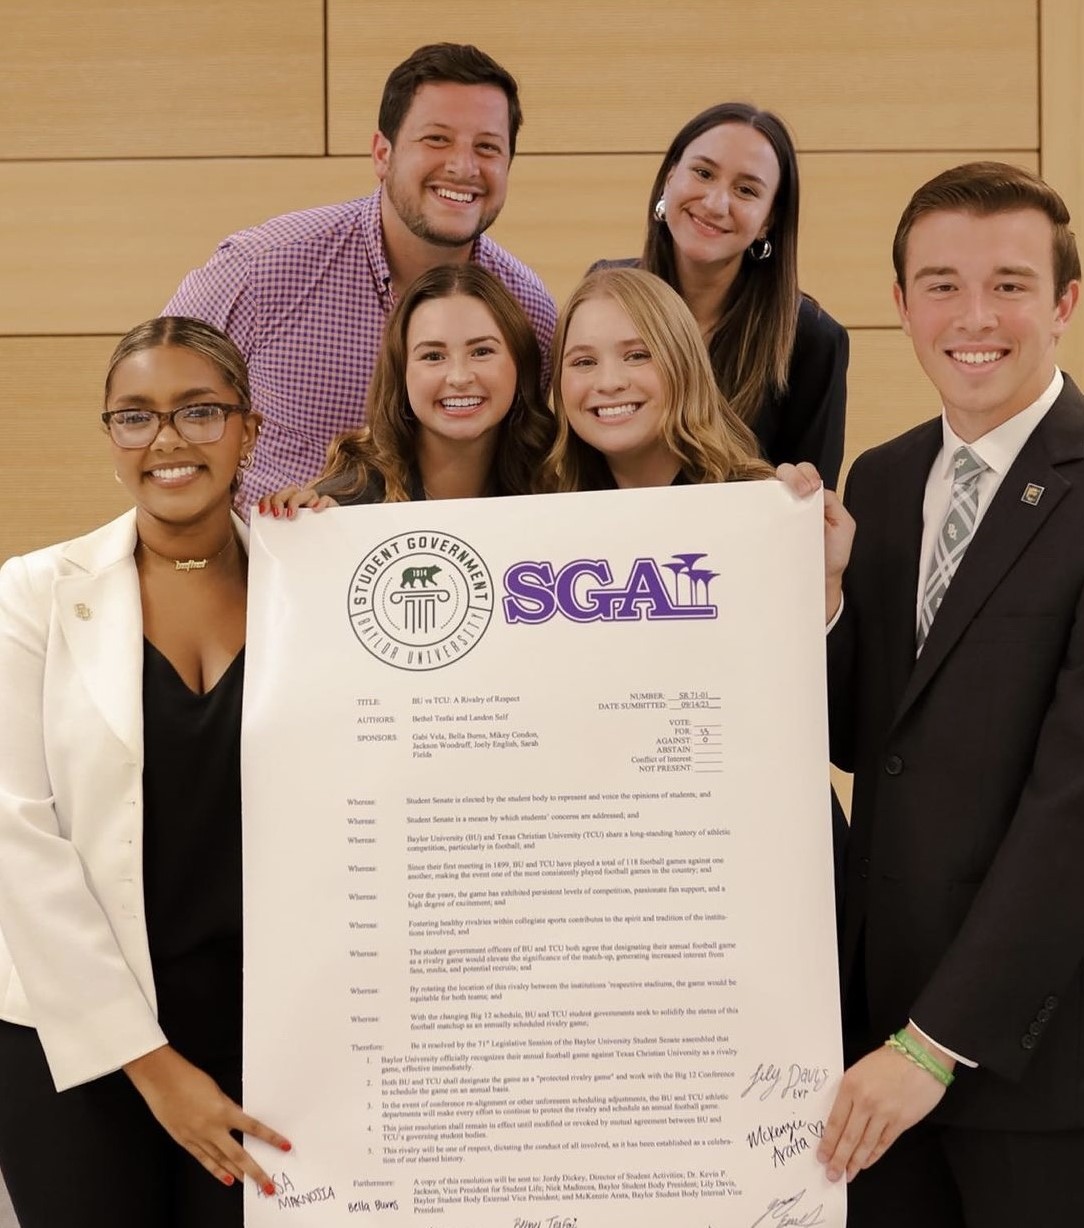 Members of Baylor and TCU student government hold a copy of their legislation to name Baylor-TCU rivalry as The Bluebonnet Battle